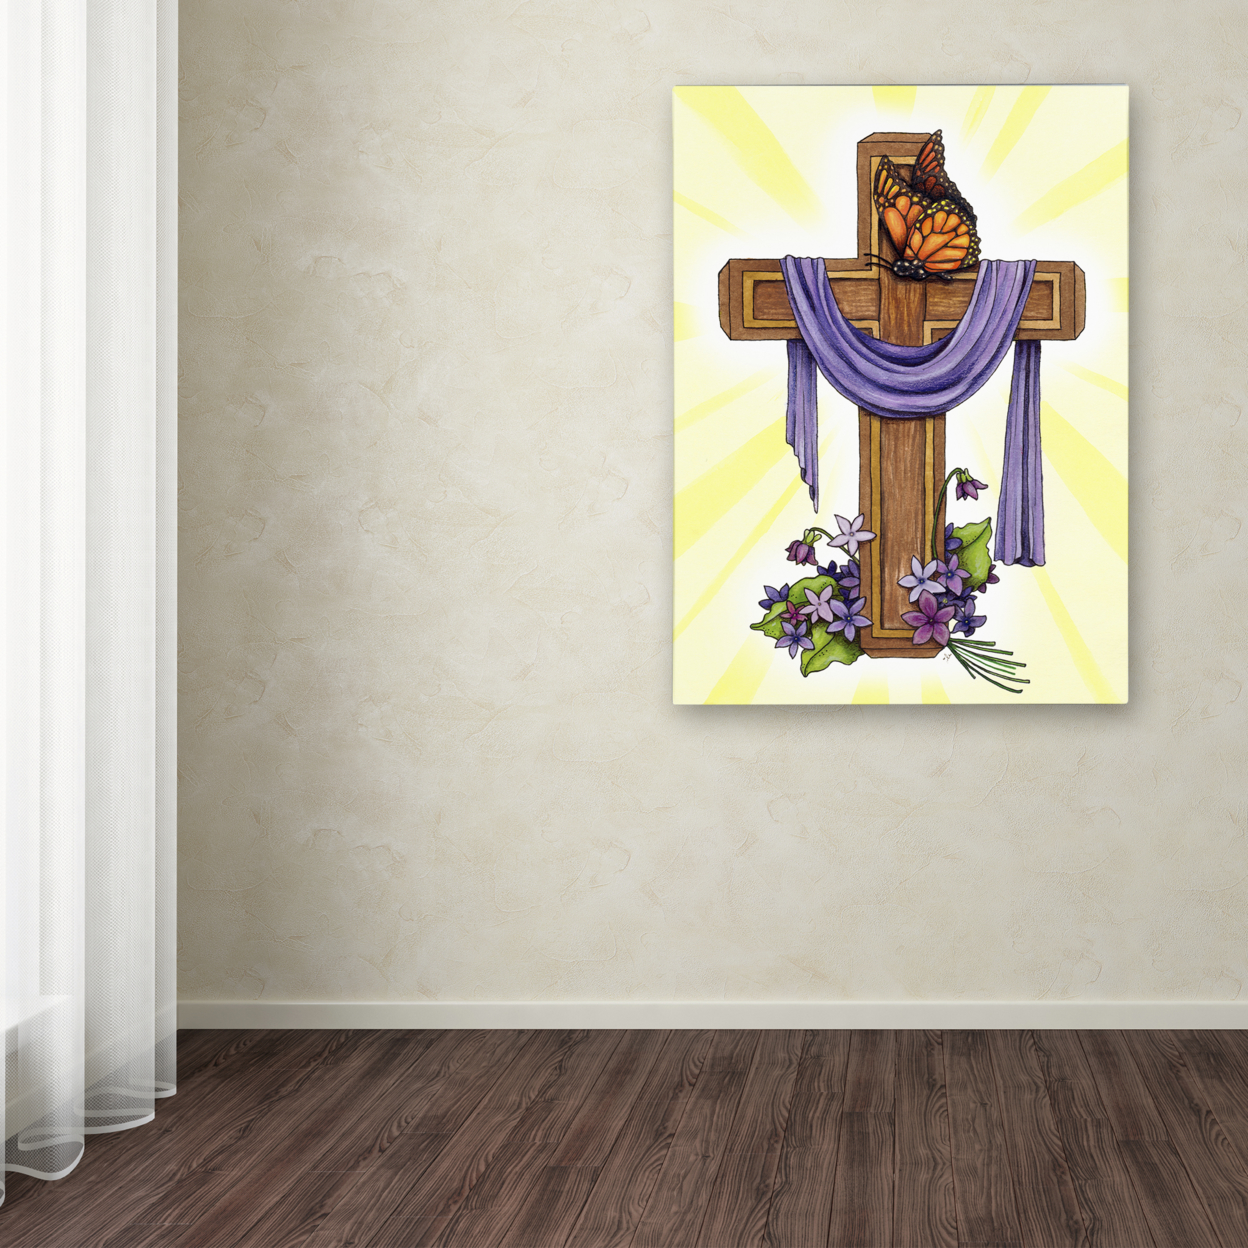 Jennifer Nilsson 'Praise To The King' Canvas Wall Art 35 X 47 Inches